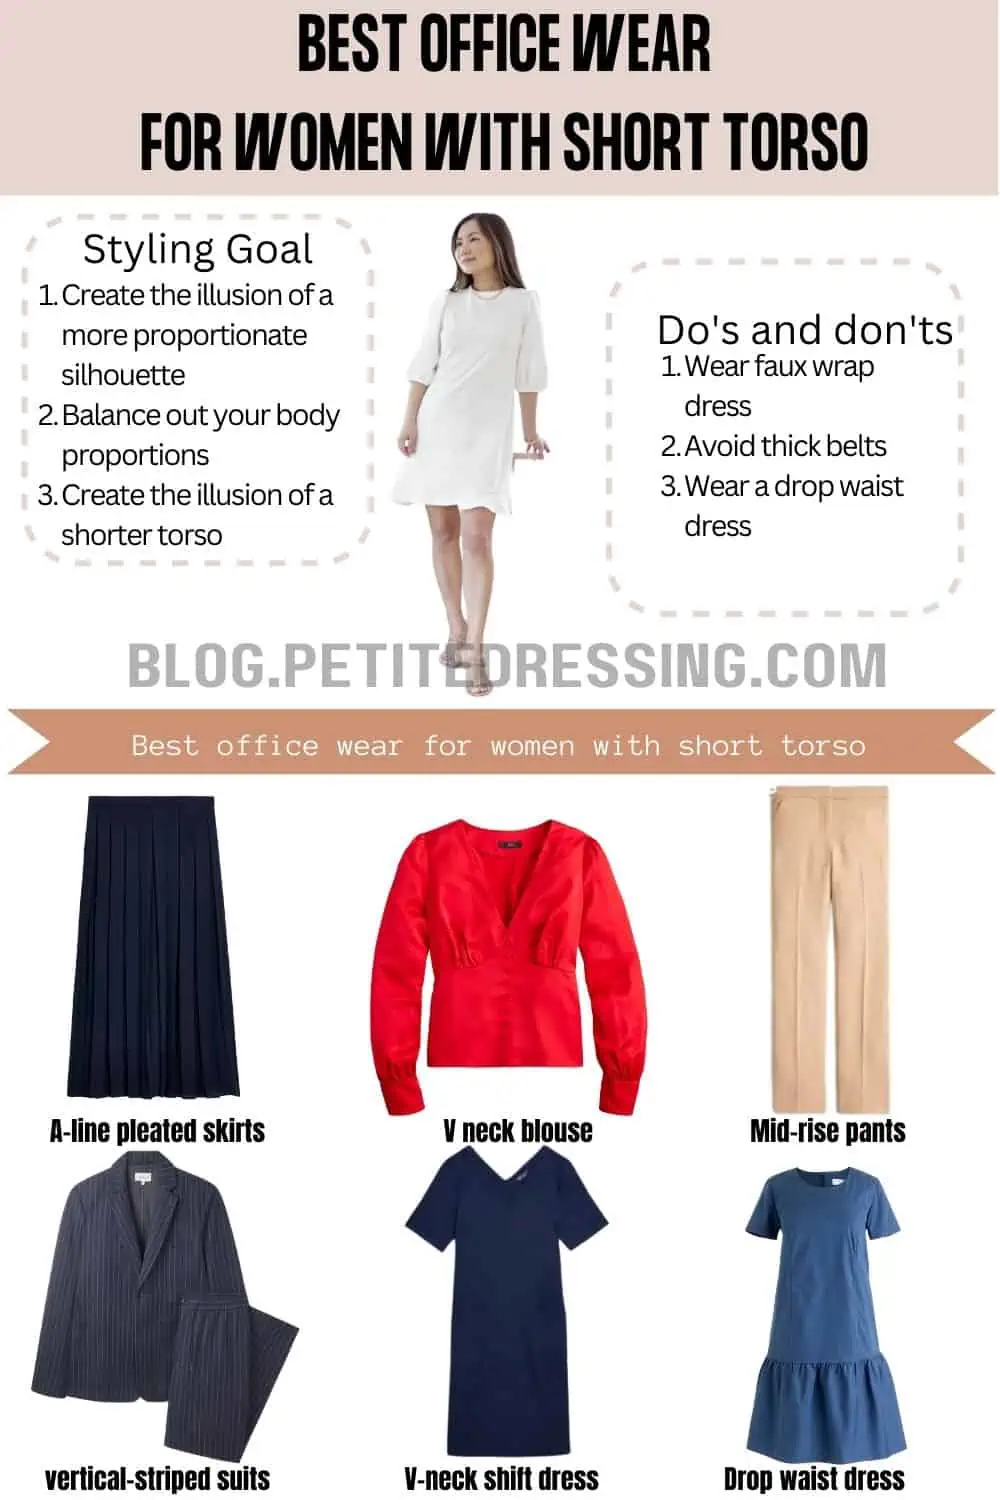 Officewear guide for women with a short torso - Petite Dressing